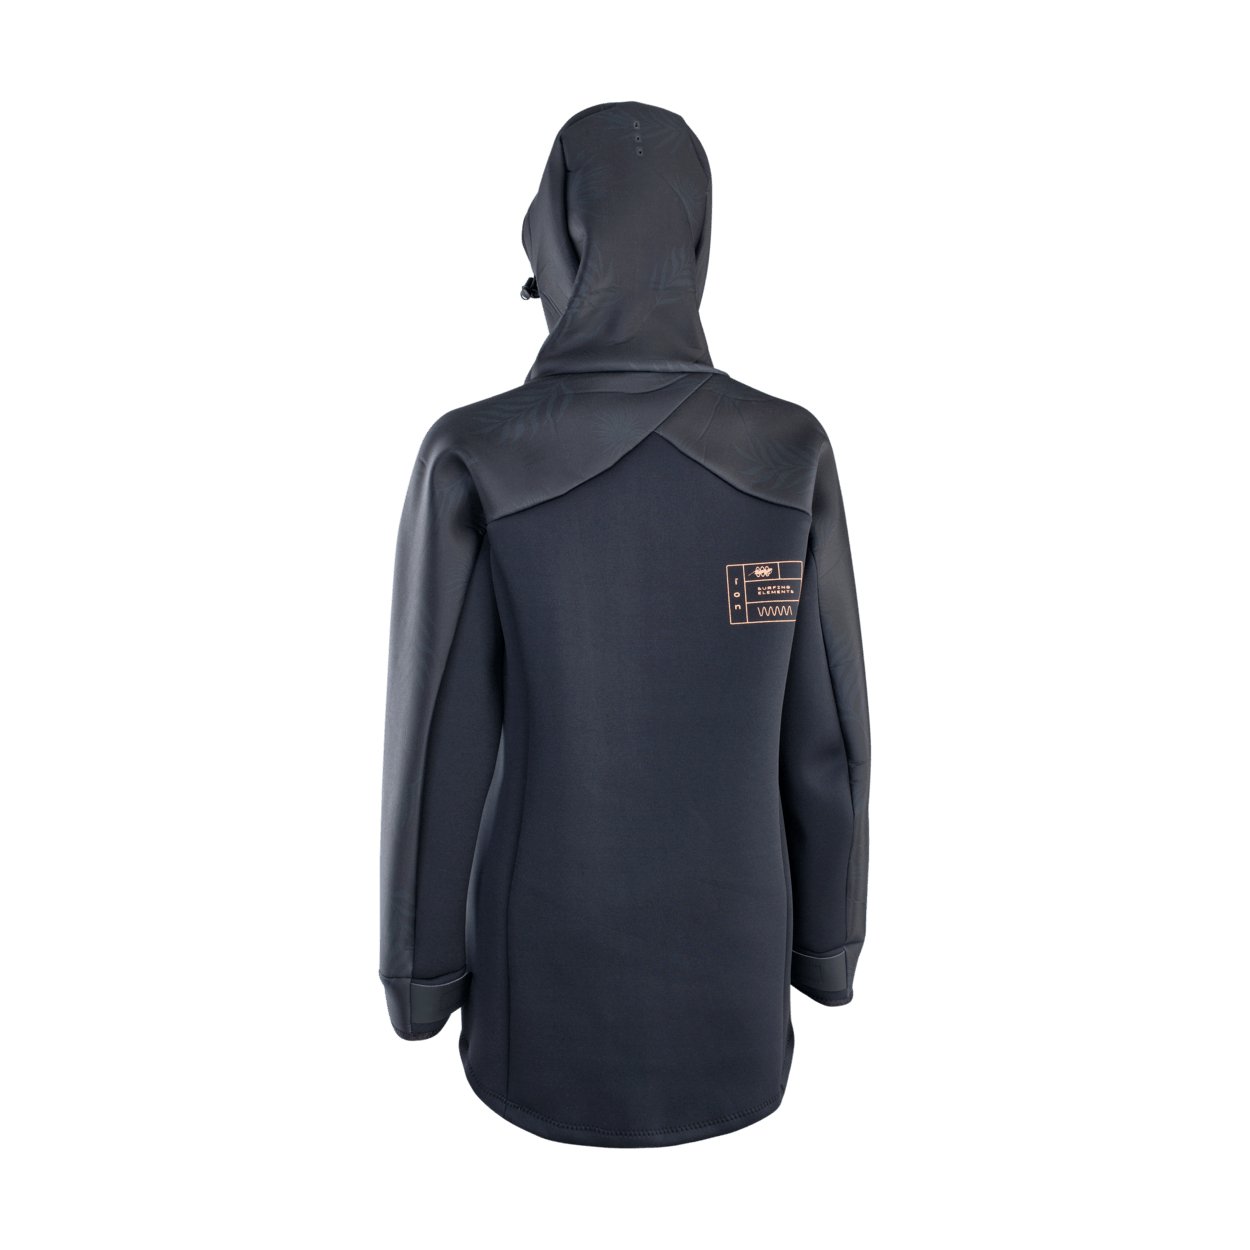 ION Neo Shelter Jacket Amp women 2022 - Worthing Watersports - 9010583063171 - Tops - ION Water